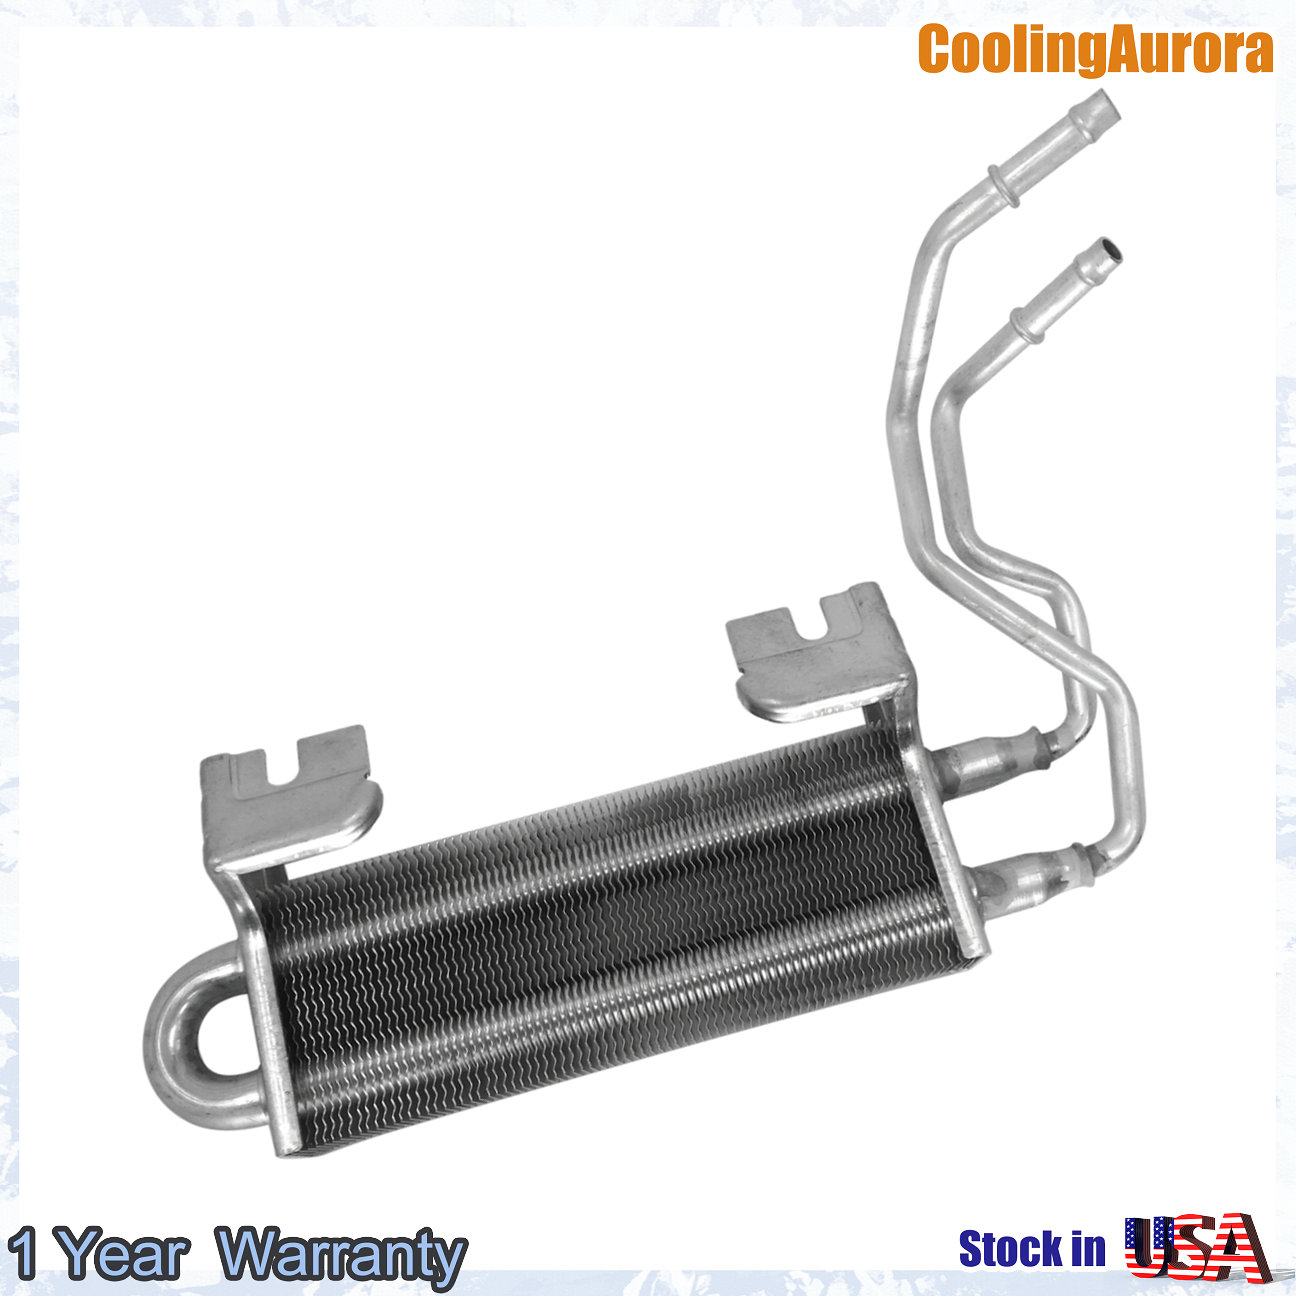 Power Steering Cooler For 97-04 Ford F-150 Lincoln Navigator F75Z3D746FA | eBay 2004 Lincoln Navigator Power Steering Fluid Type